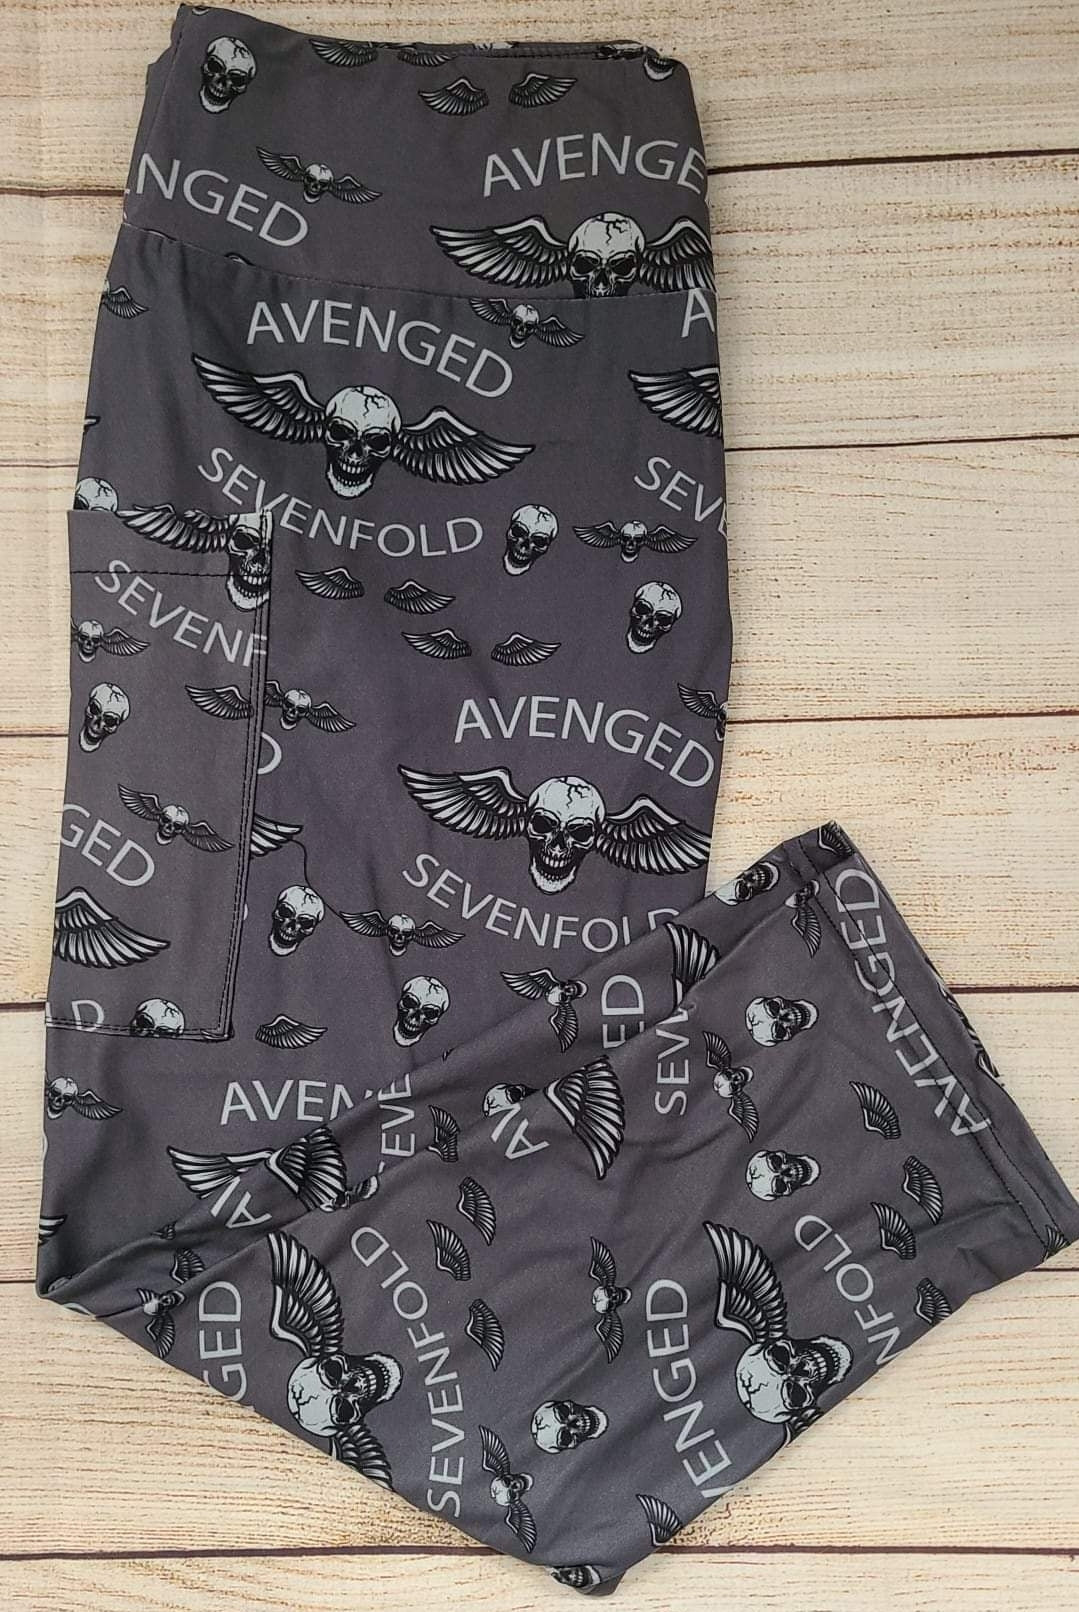 Avenged leggings and capris with pockets